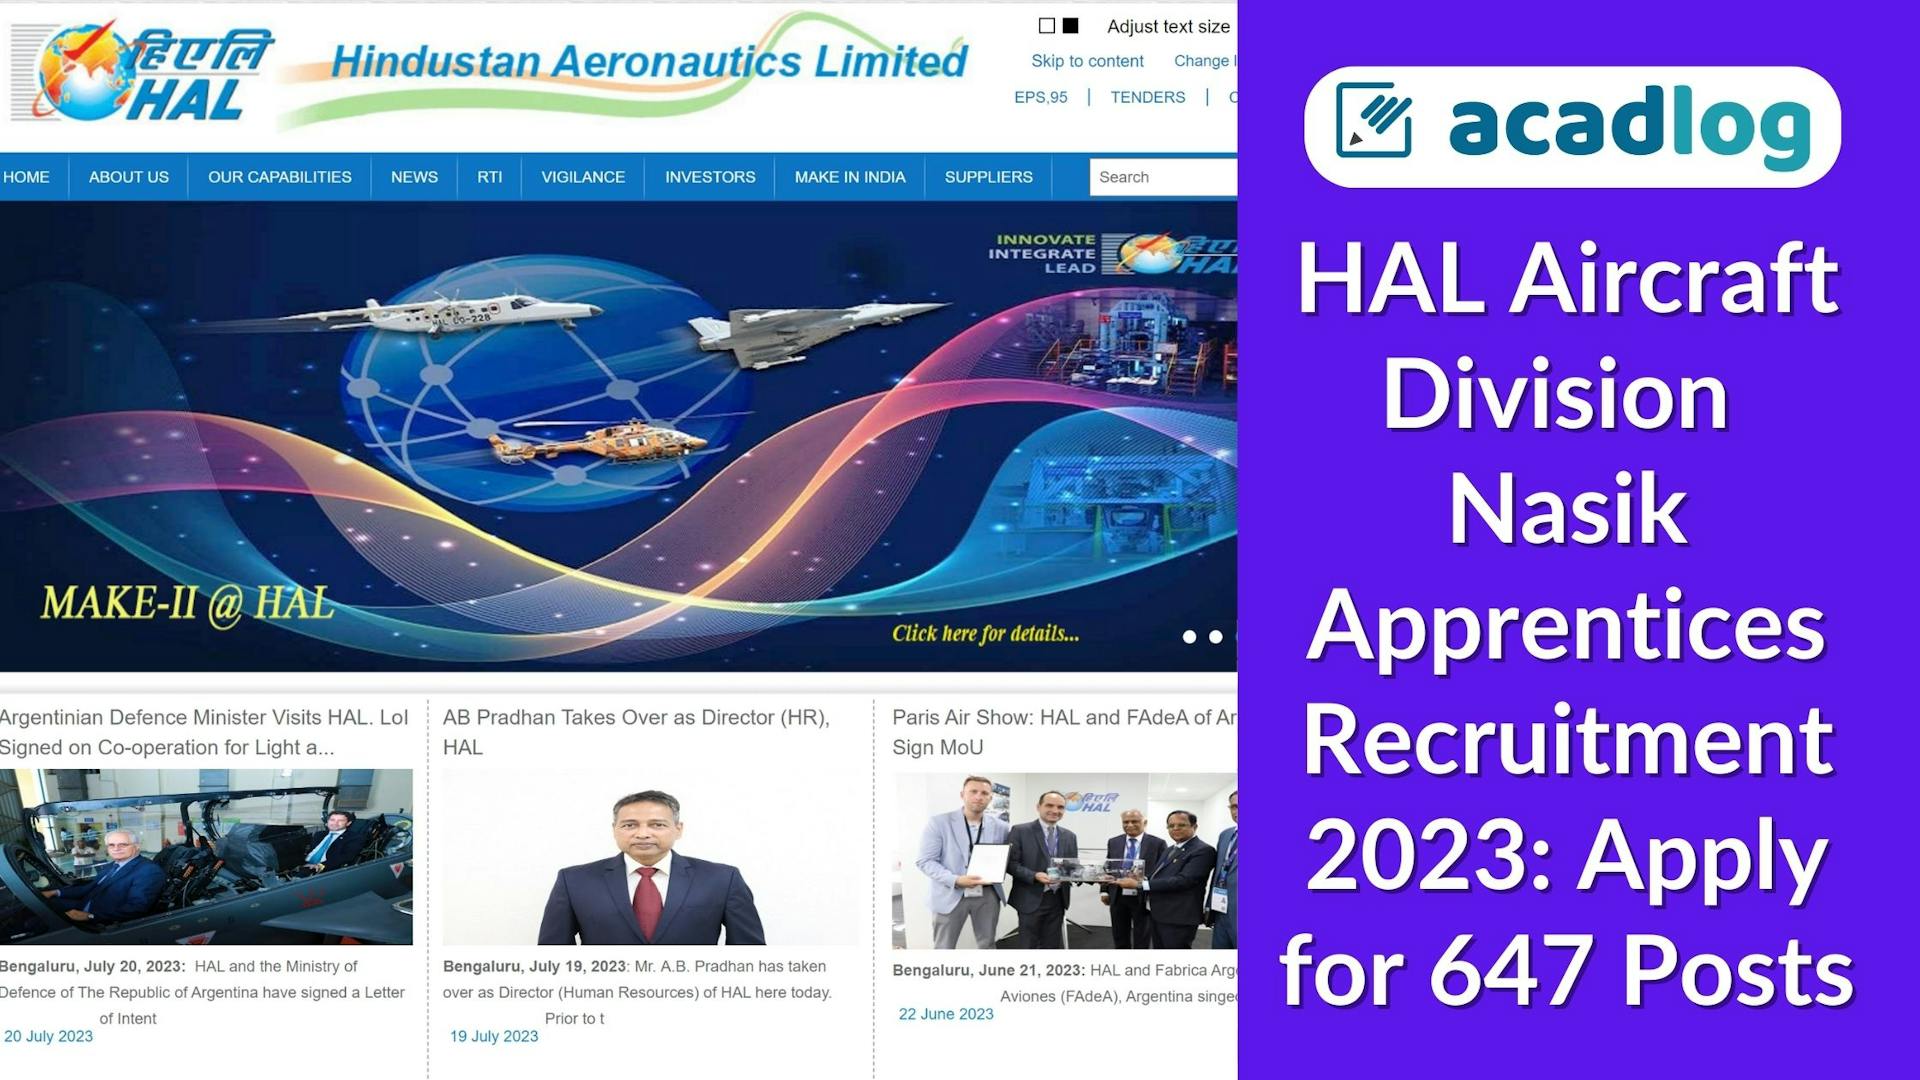 HAL Aircraft Division Nasik Apprentices Recruitment 2023: Apply for 647 Posts